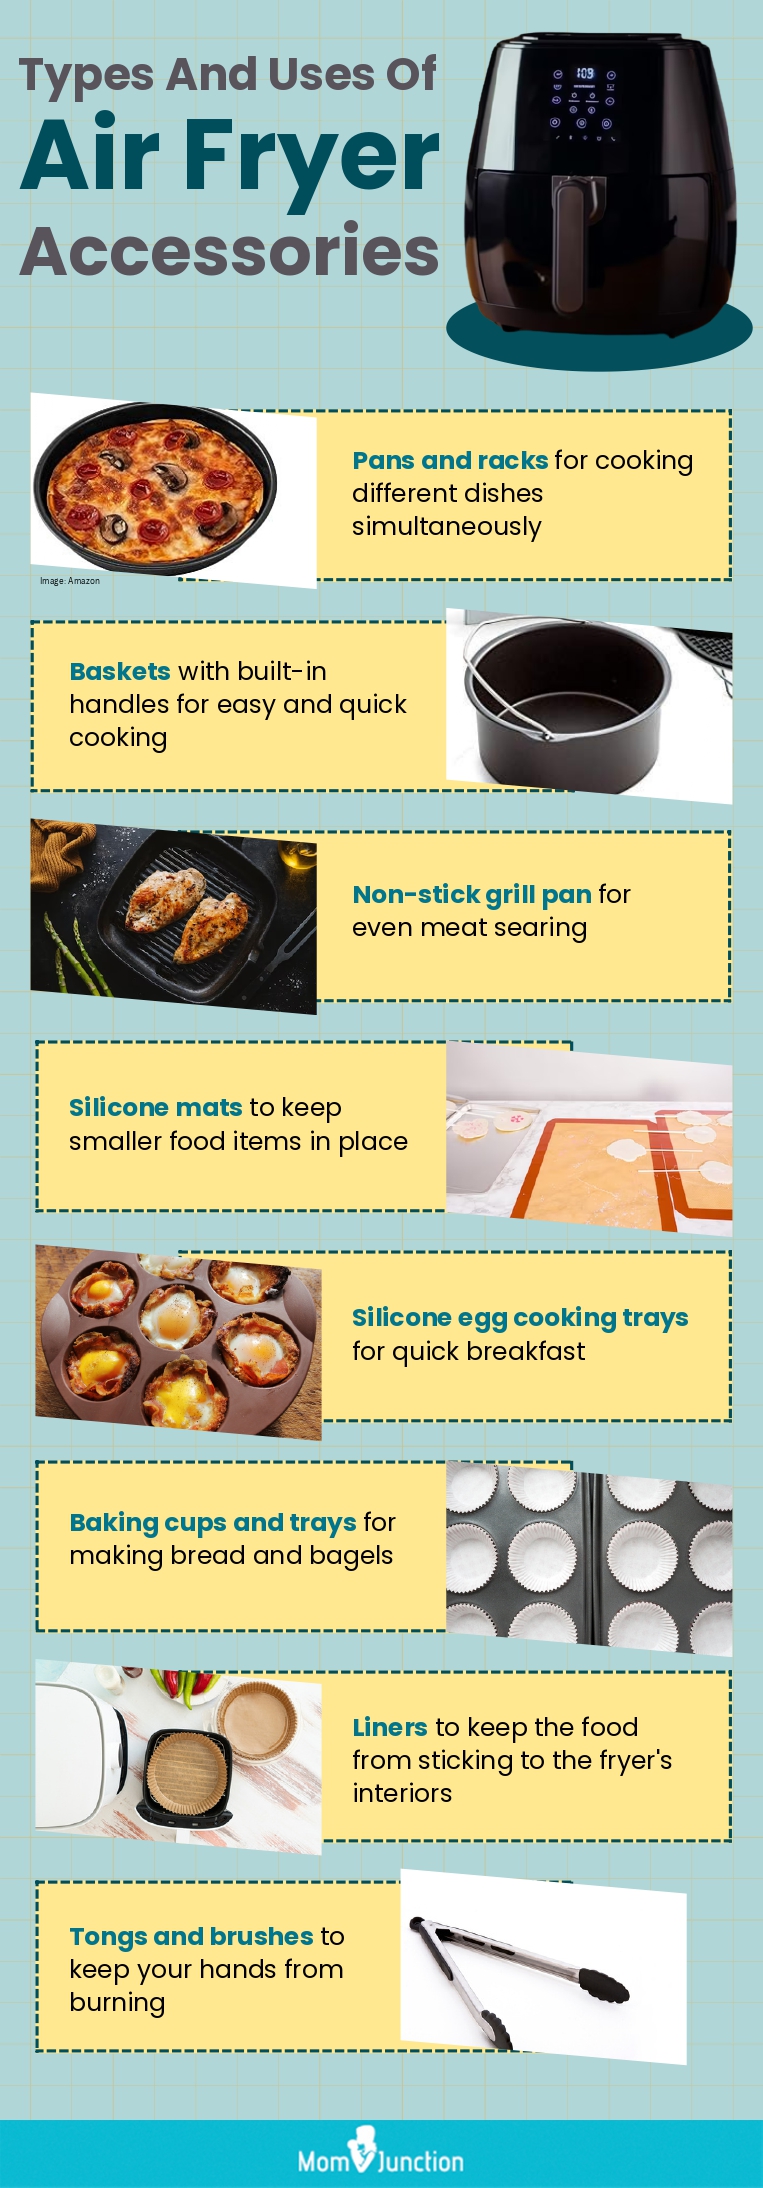 Types And Uses Of Air Fryer Accessories (infographic)